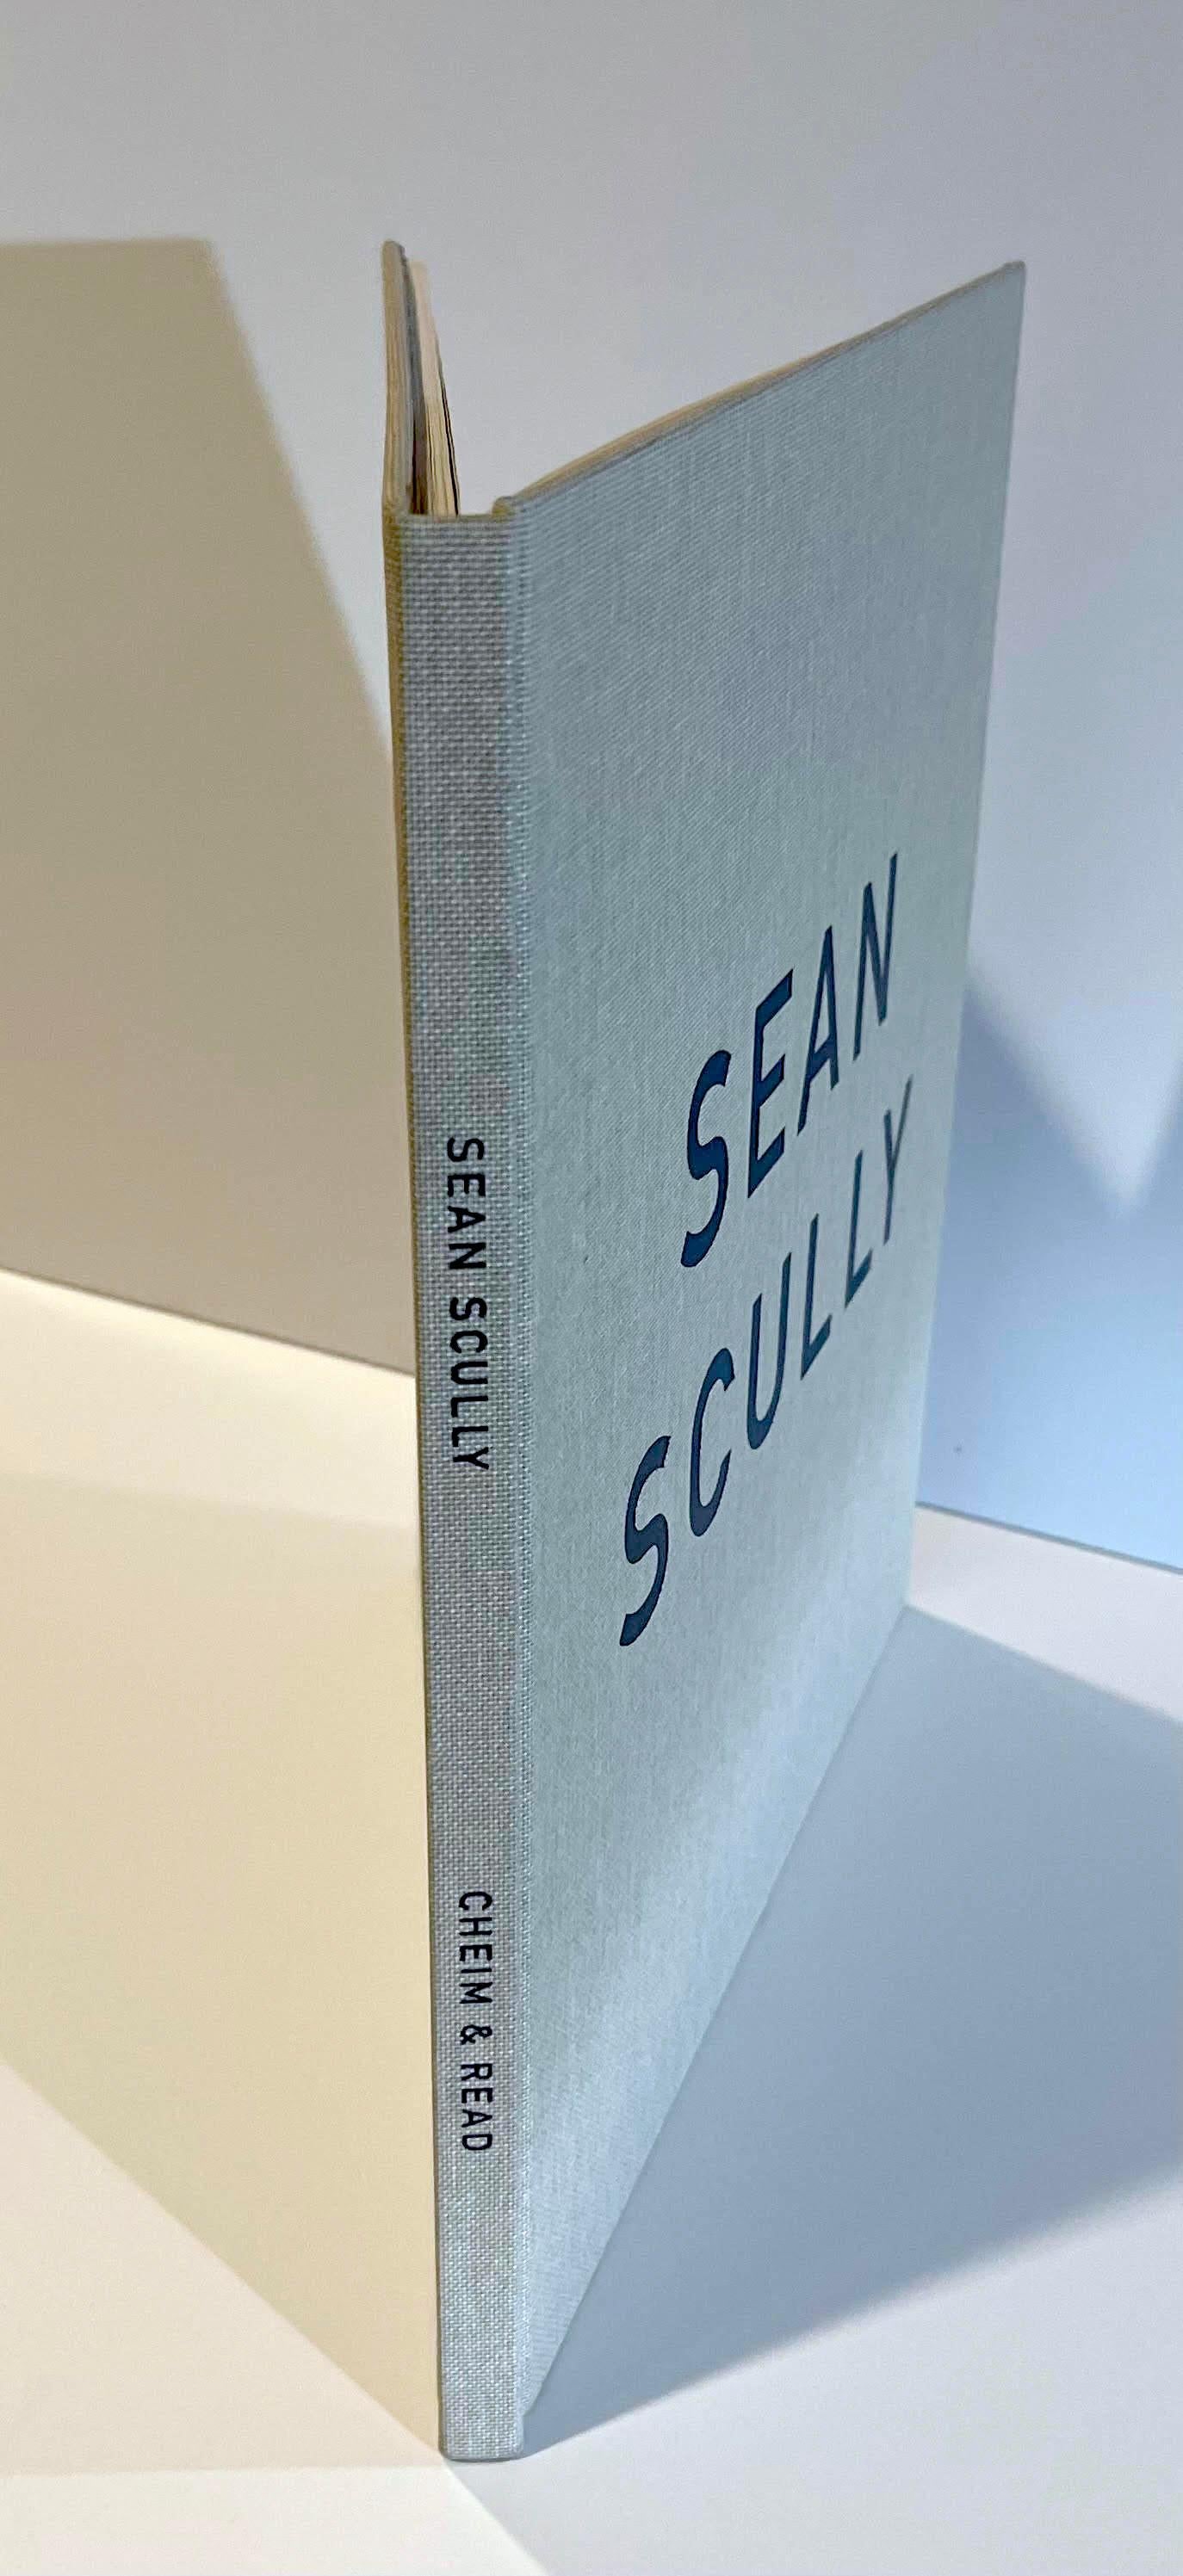 Sean Scully Night and Day (hardback monograph, hand signed by Sean Scully) For Sale 10